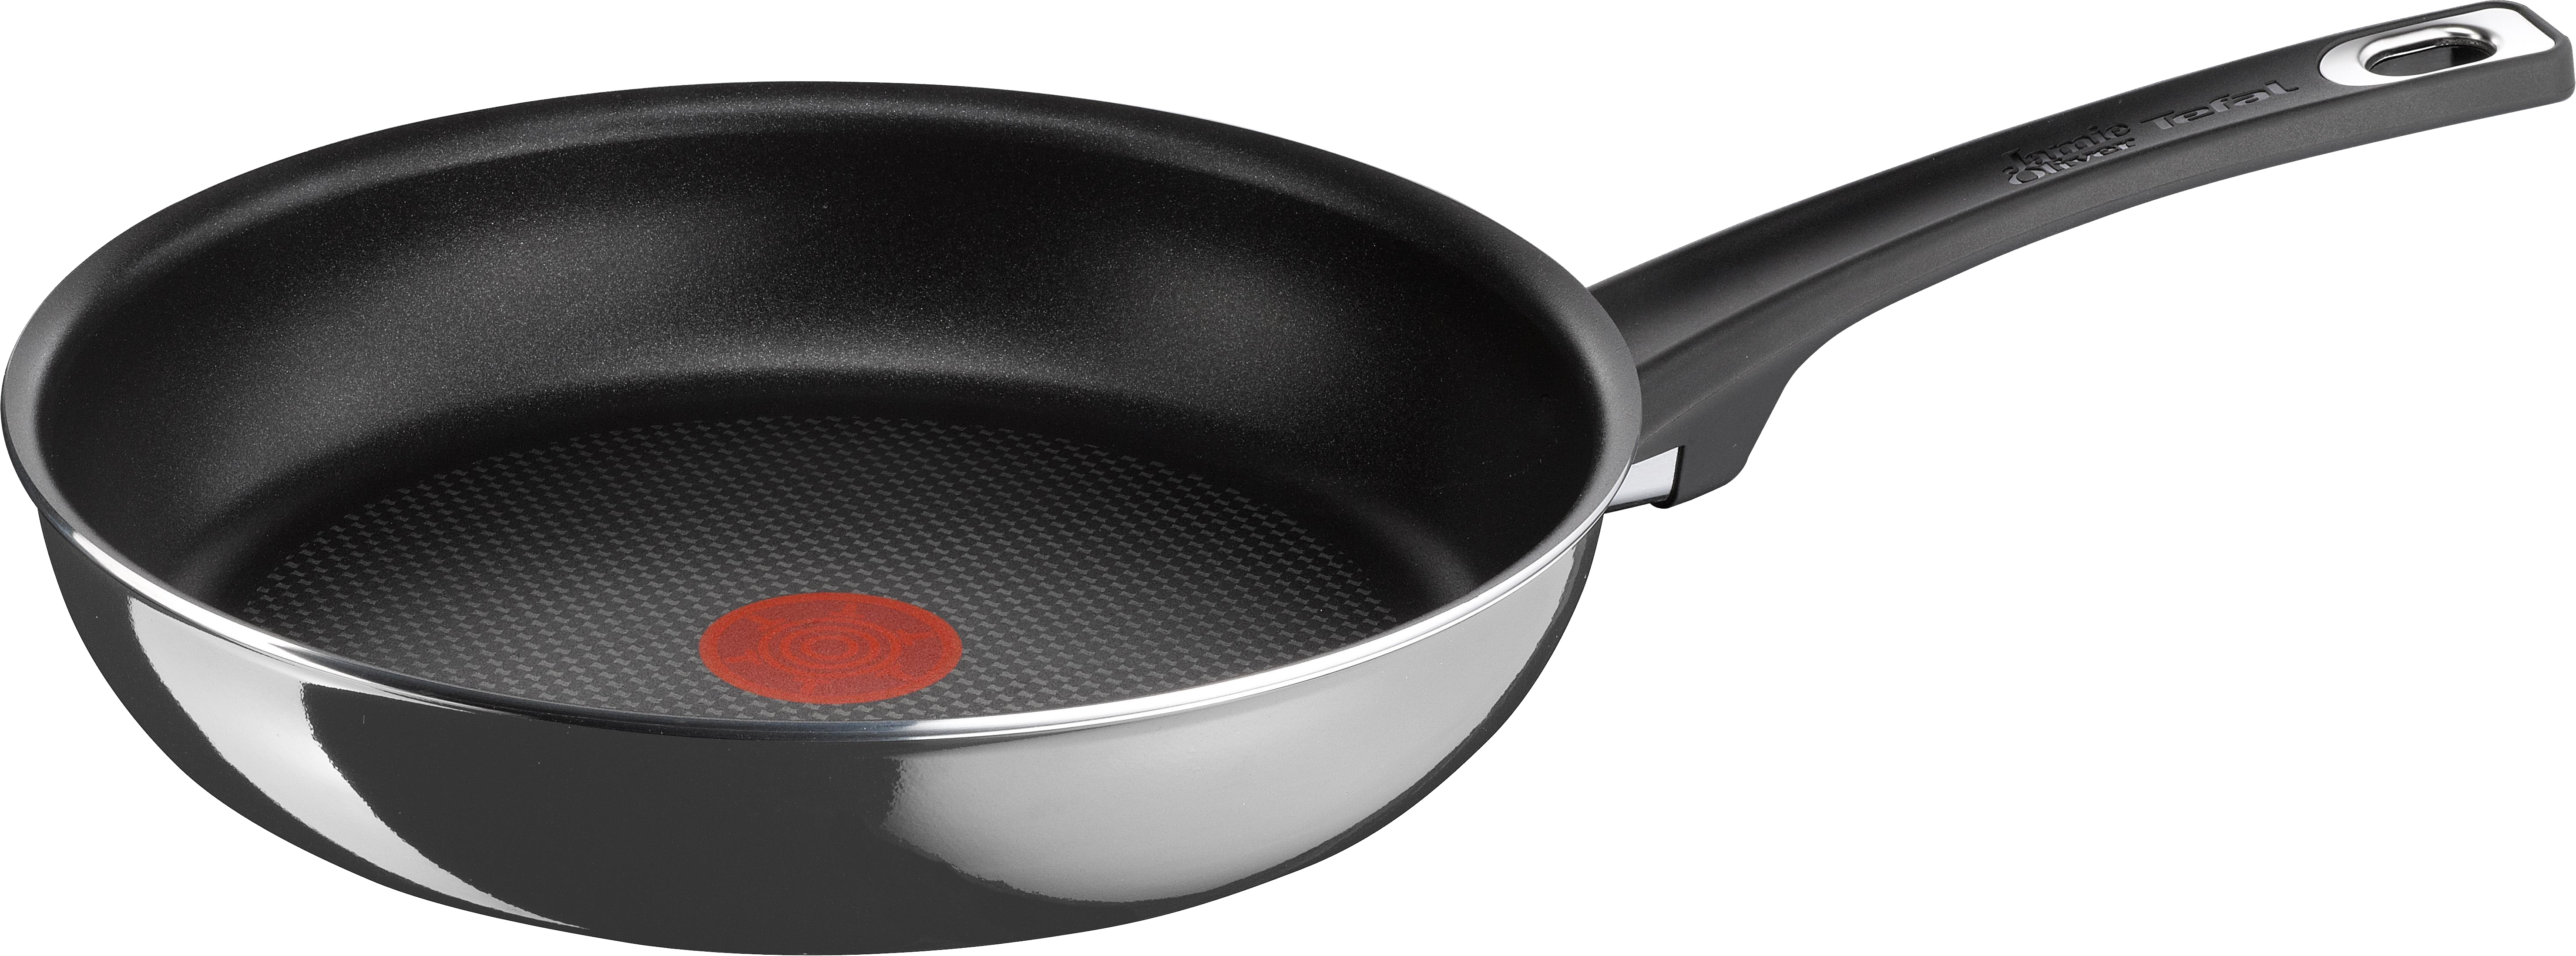 Frying pan PNG images Download 